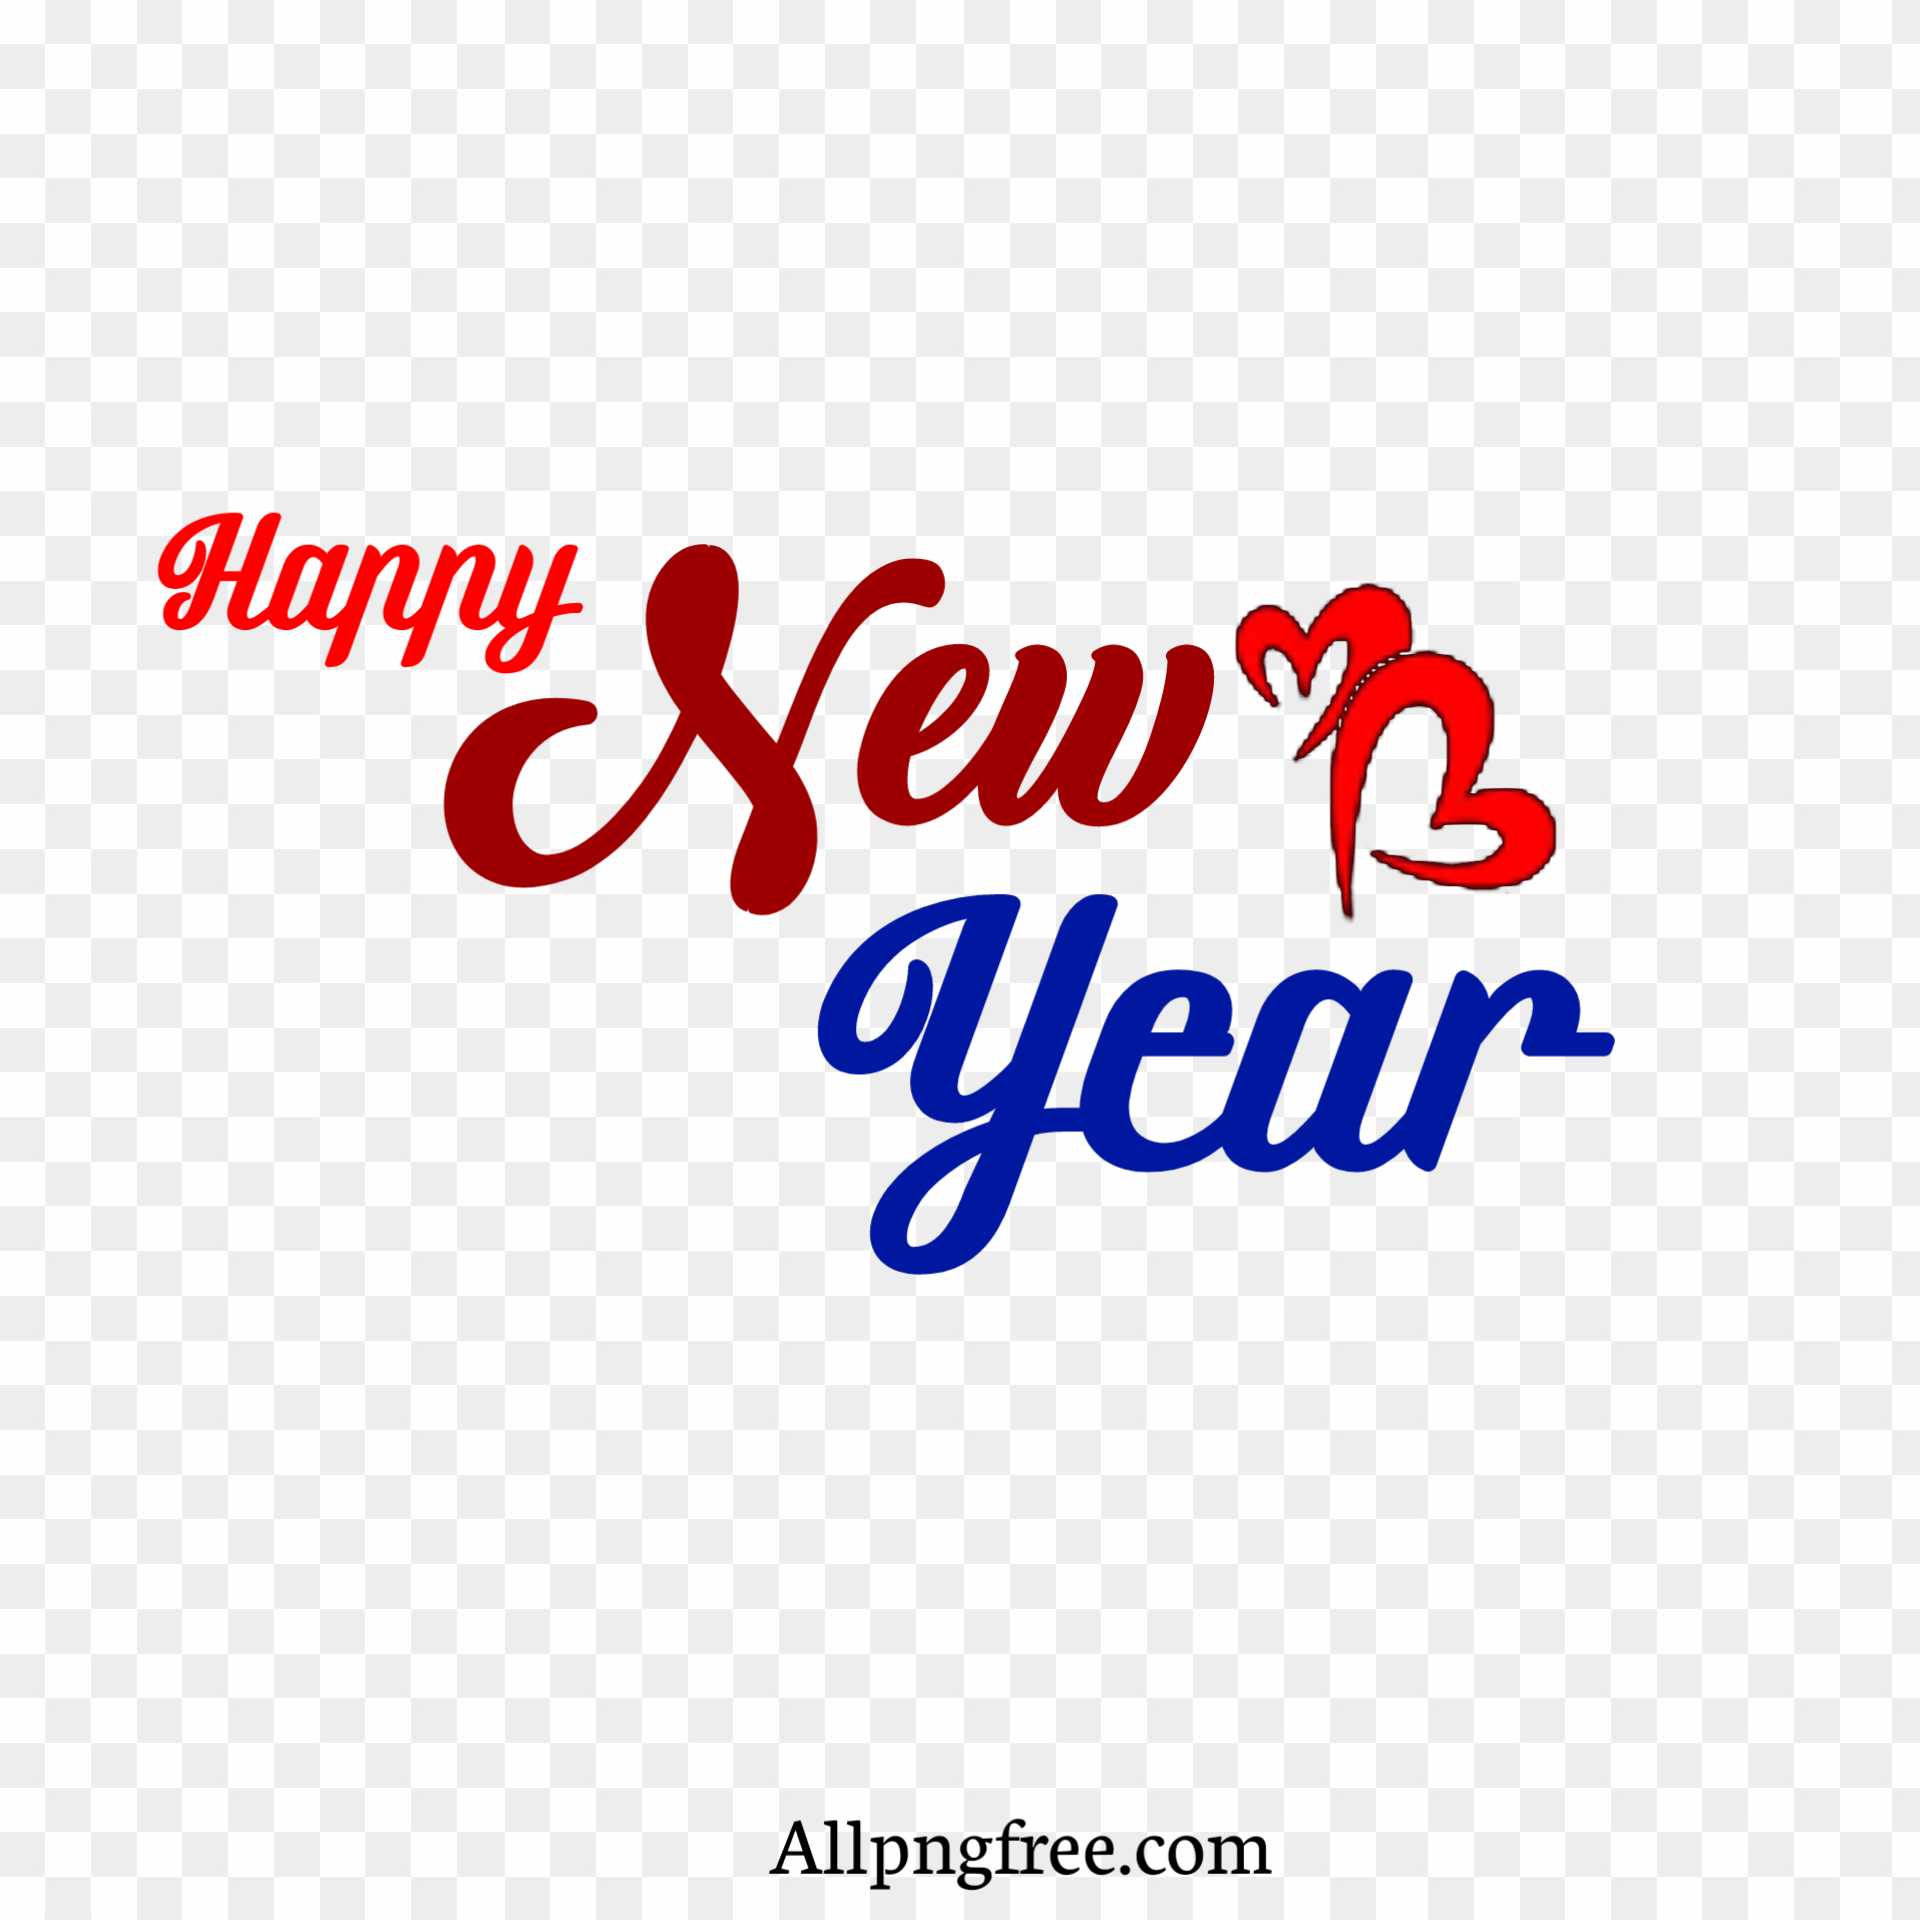 Happy New year PNG transparent images